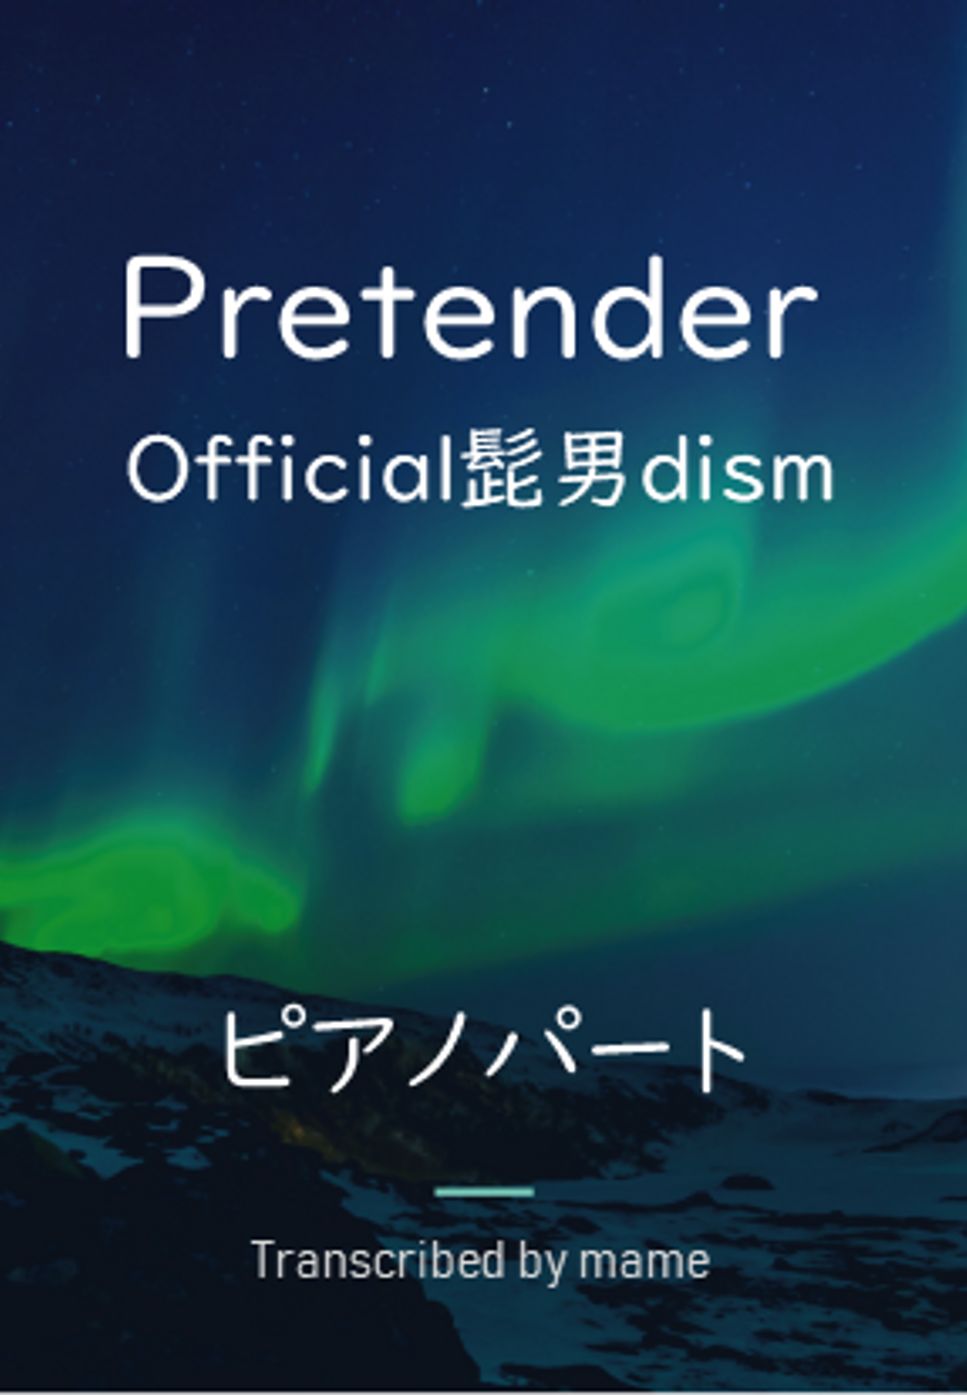 Official髭男dism - Pretender (piano part) by mame